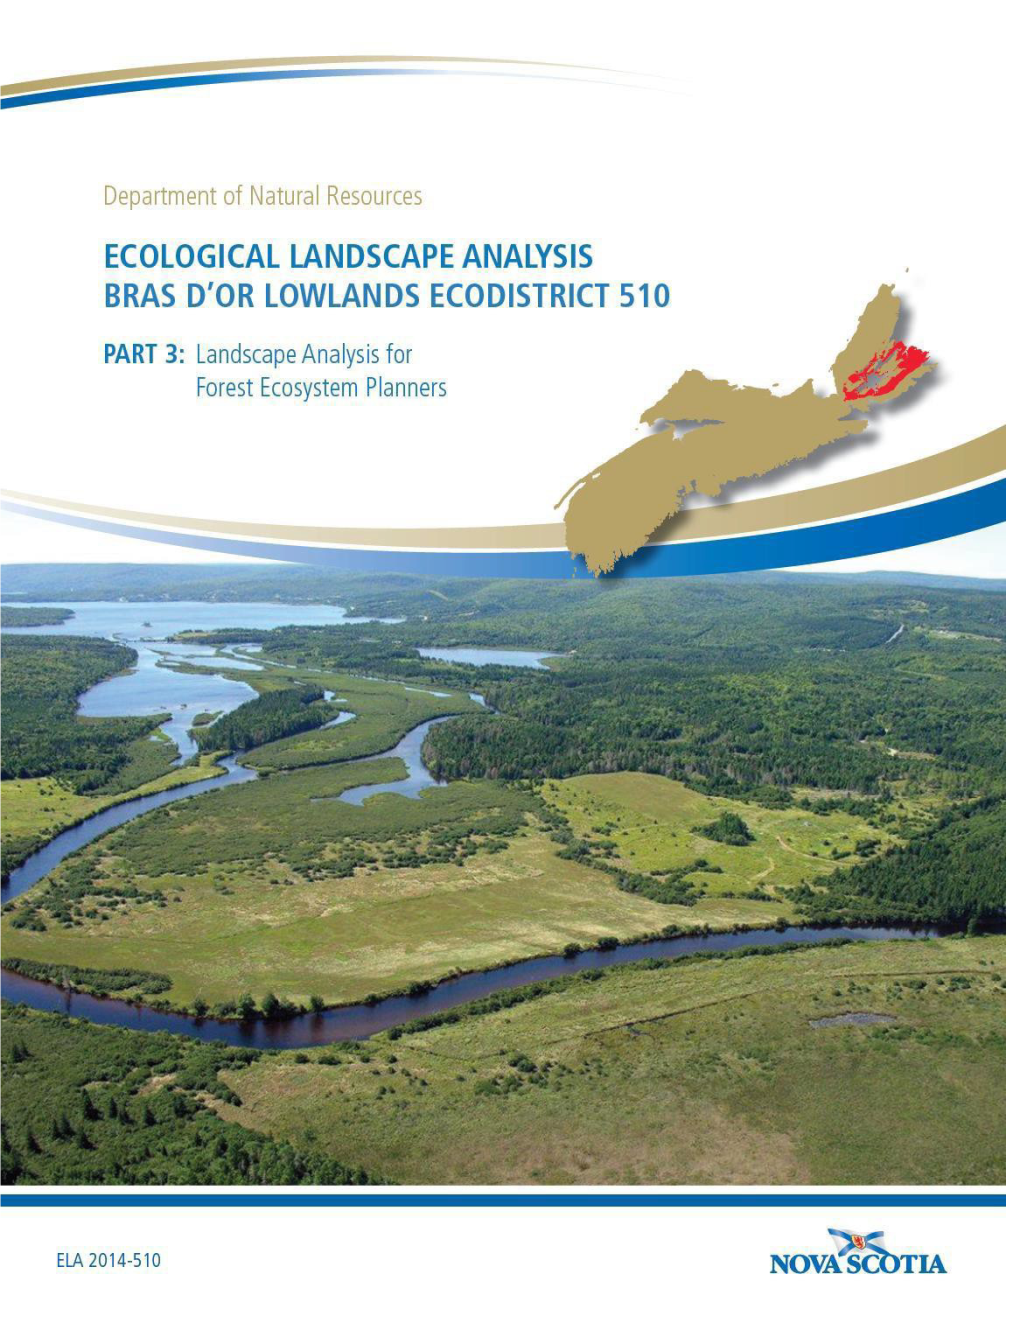 Ecological Landscape Analysis of Bras D'or Lowlands Ecodistrict 510 42